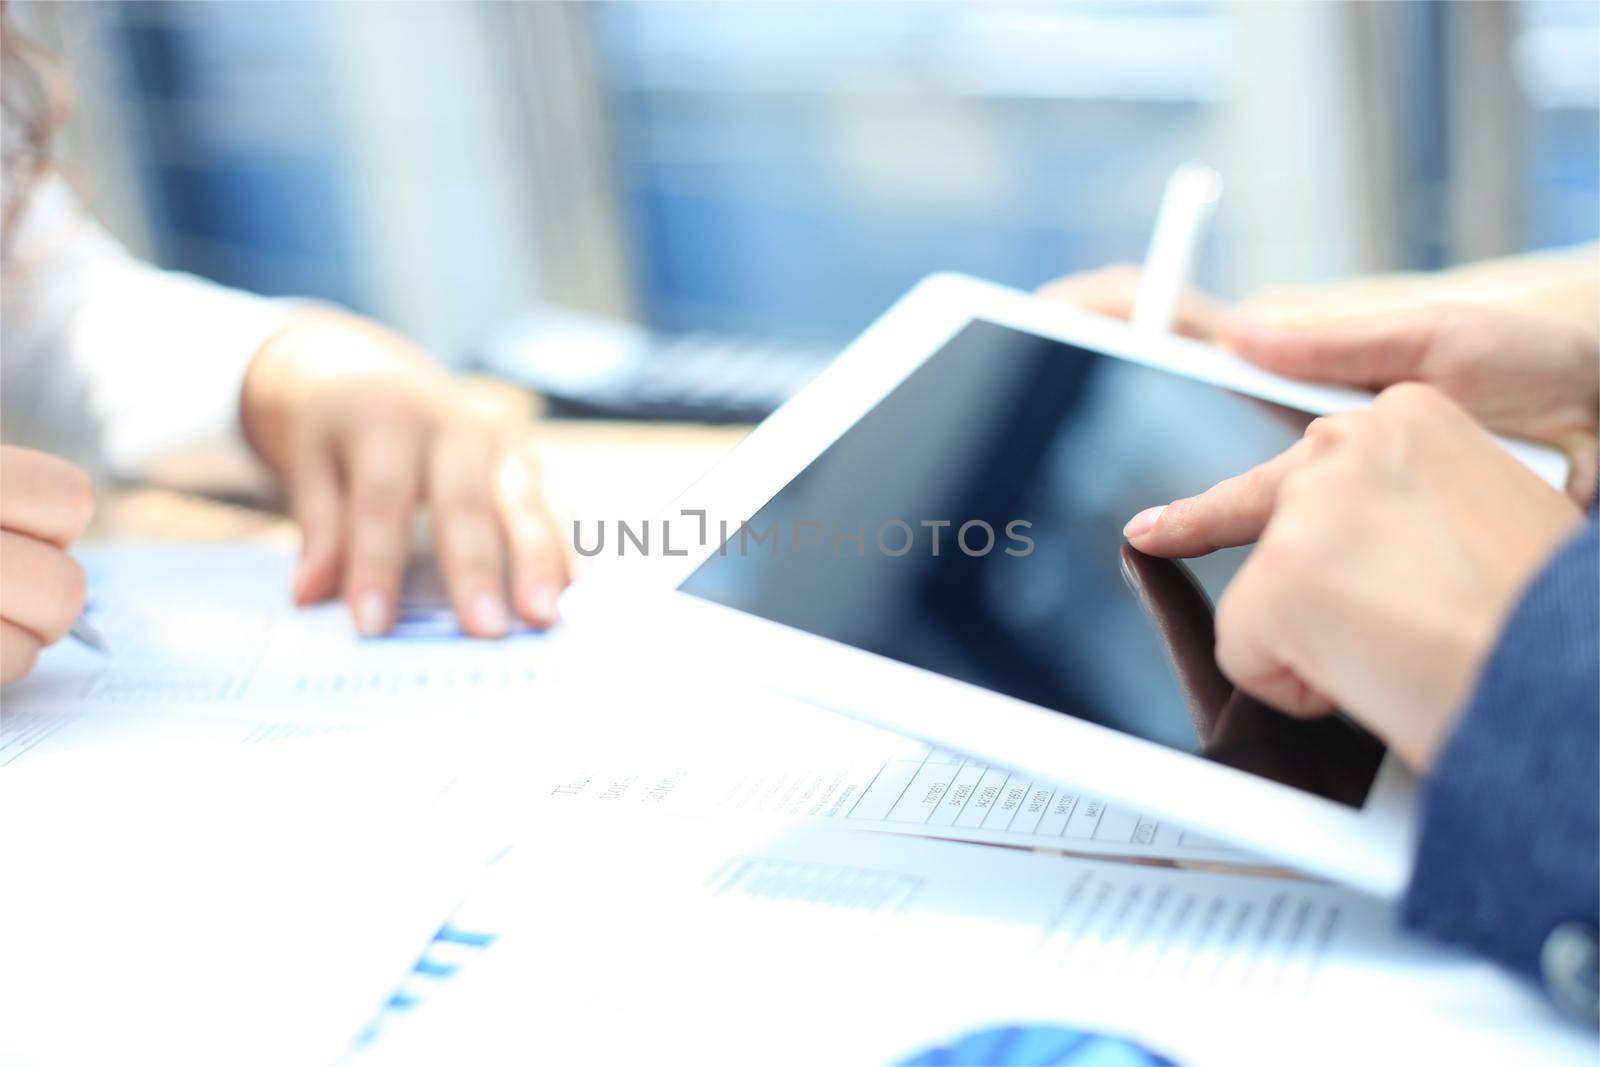 Business person analyzing financial statistics displayed on the tablet screen by tsyhun